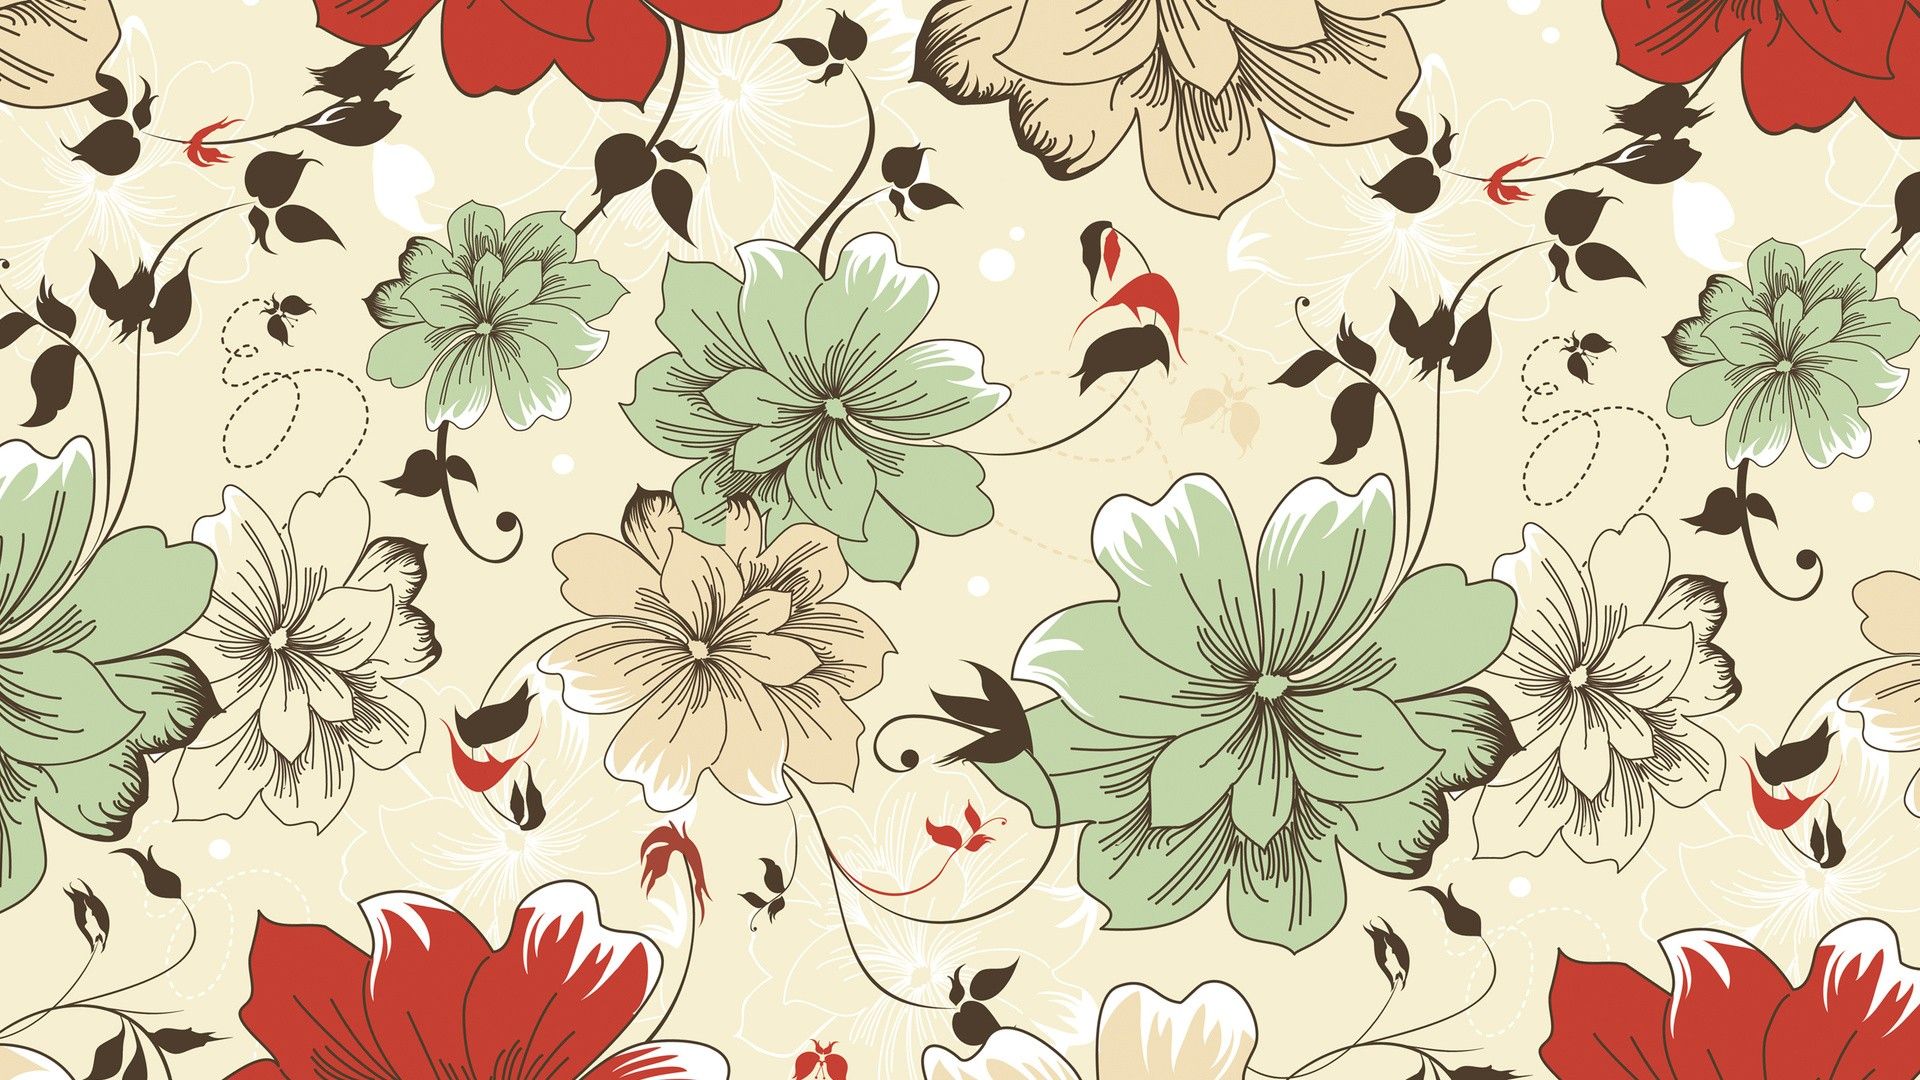 Floral Texture Wallpaper Free Floral Texture Background